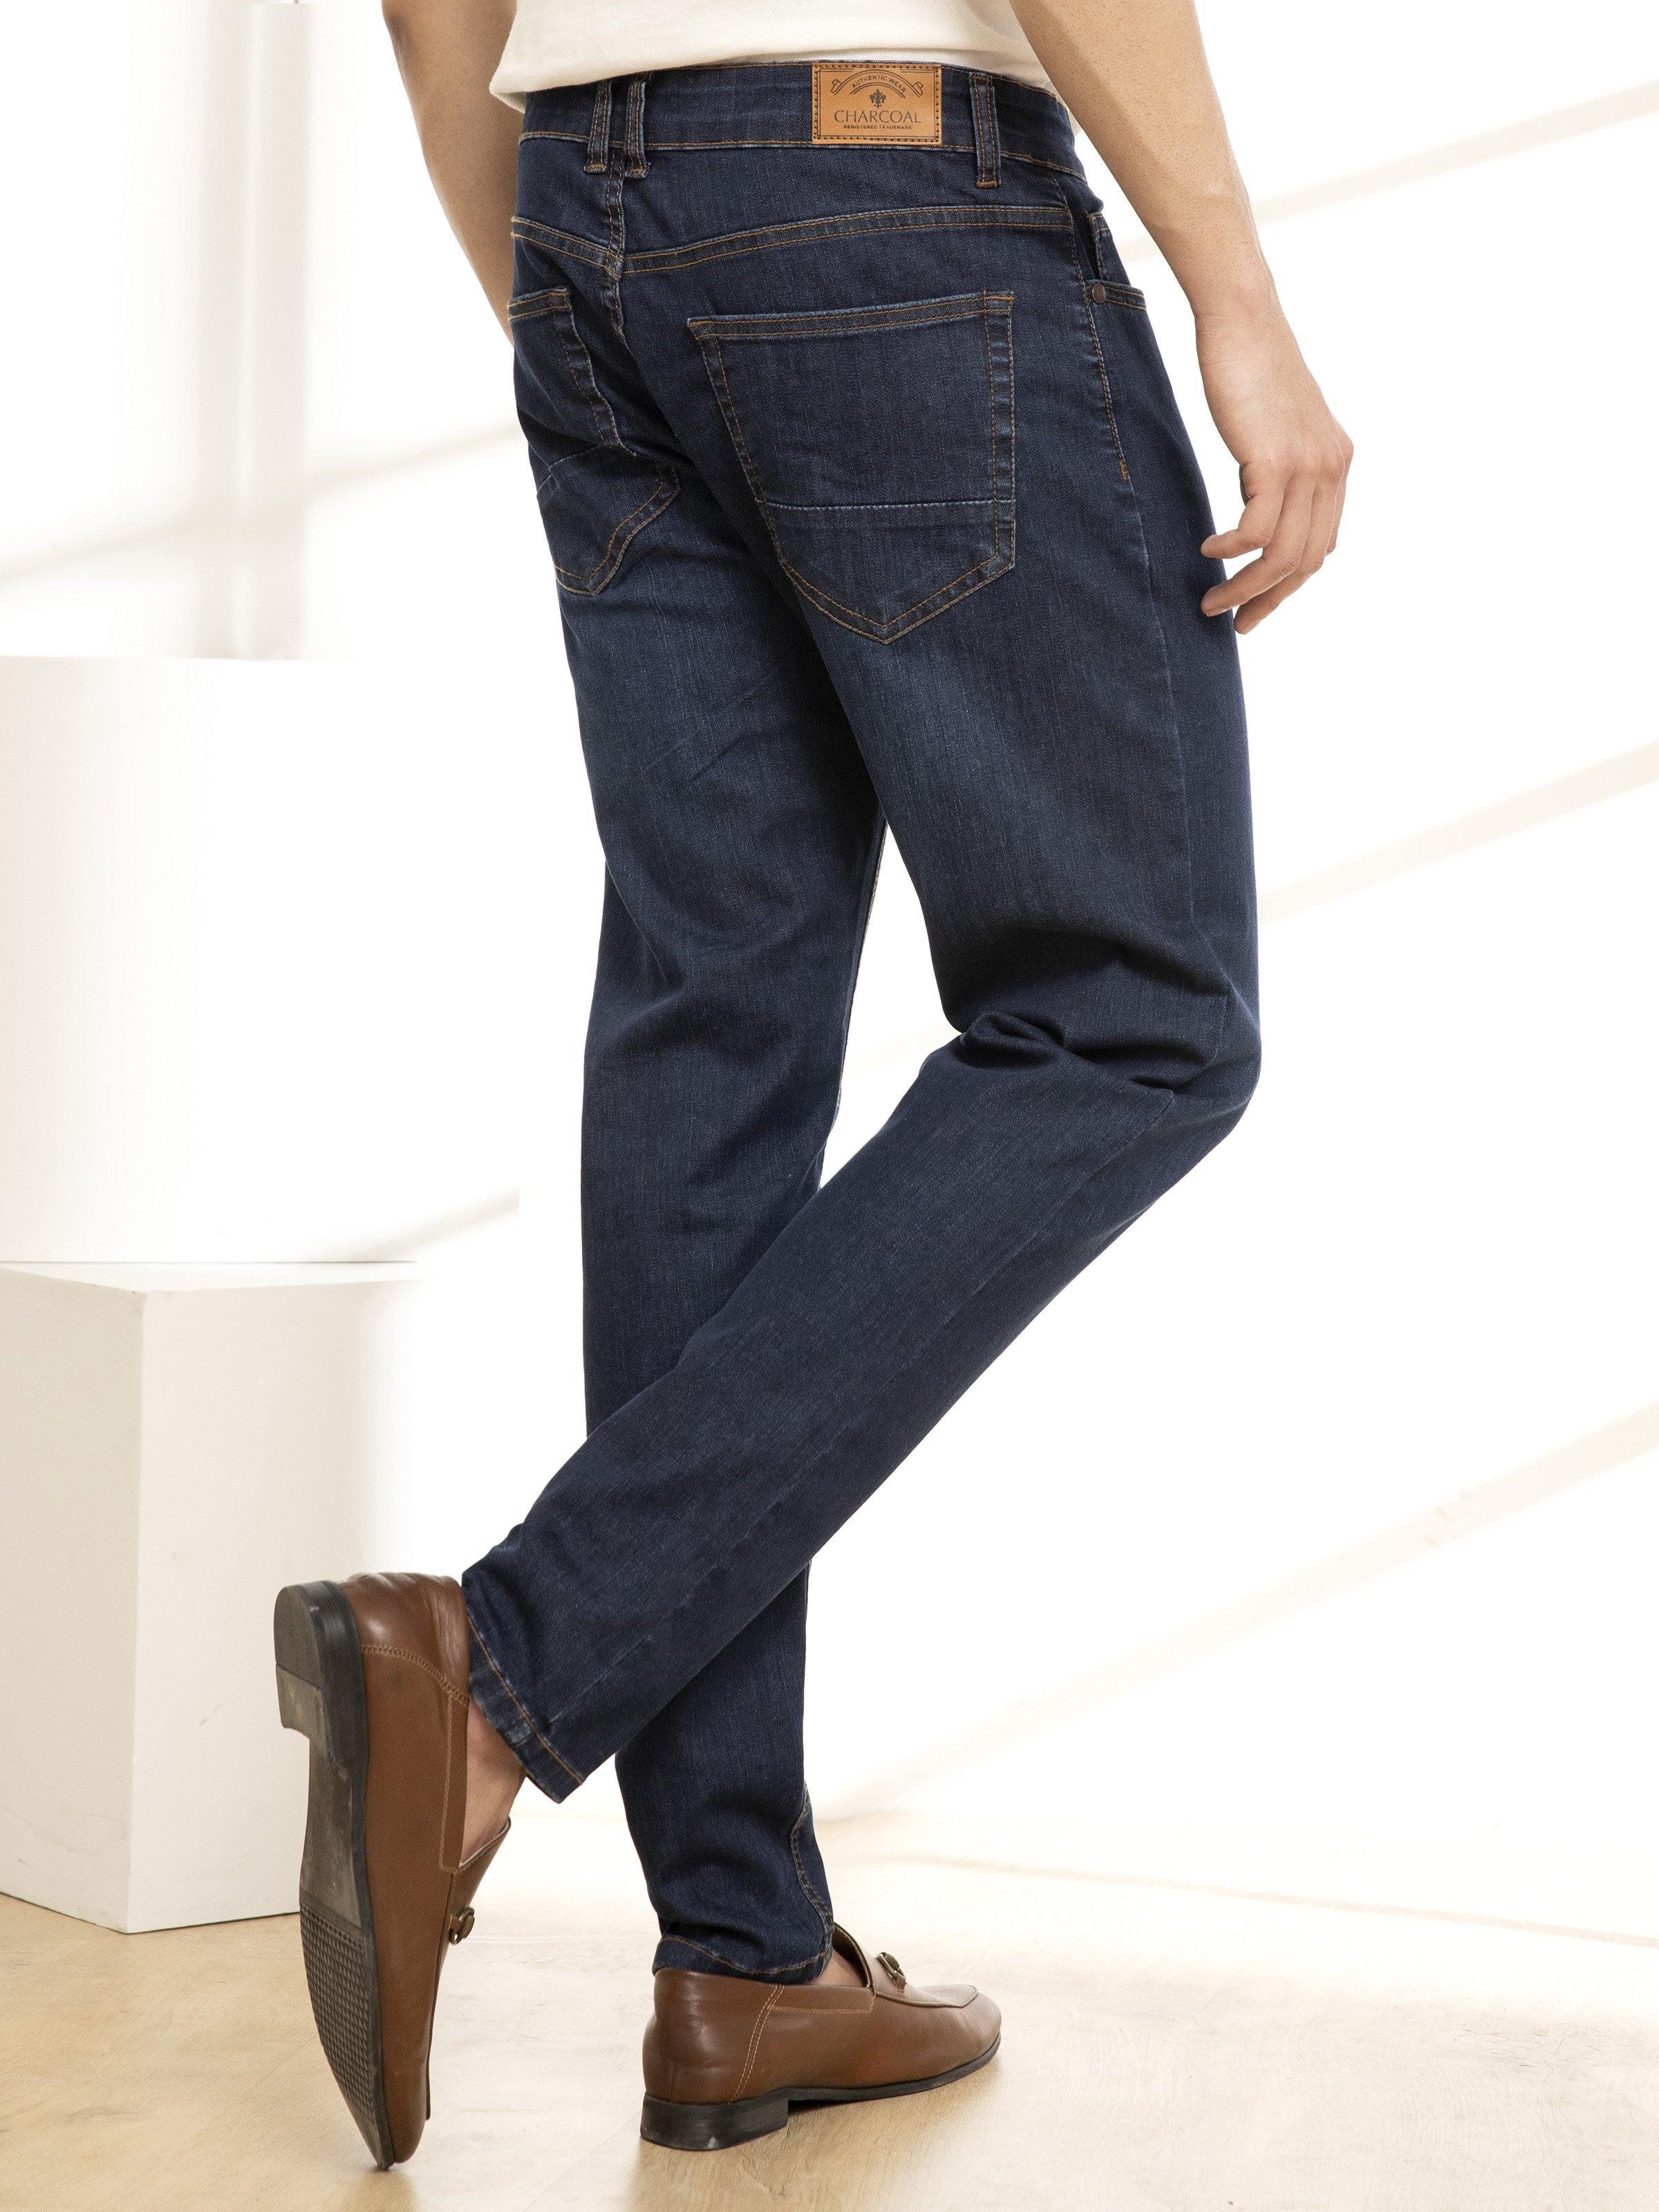 SLIM FIT JEANS DARK BLUE at Charcoal Clothing